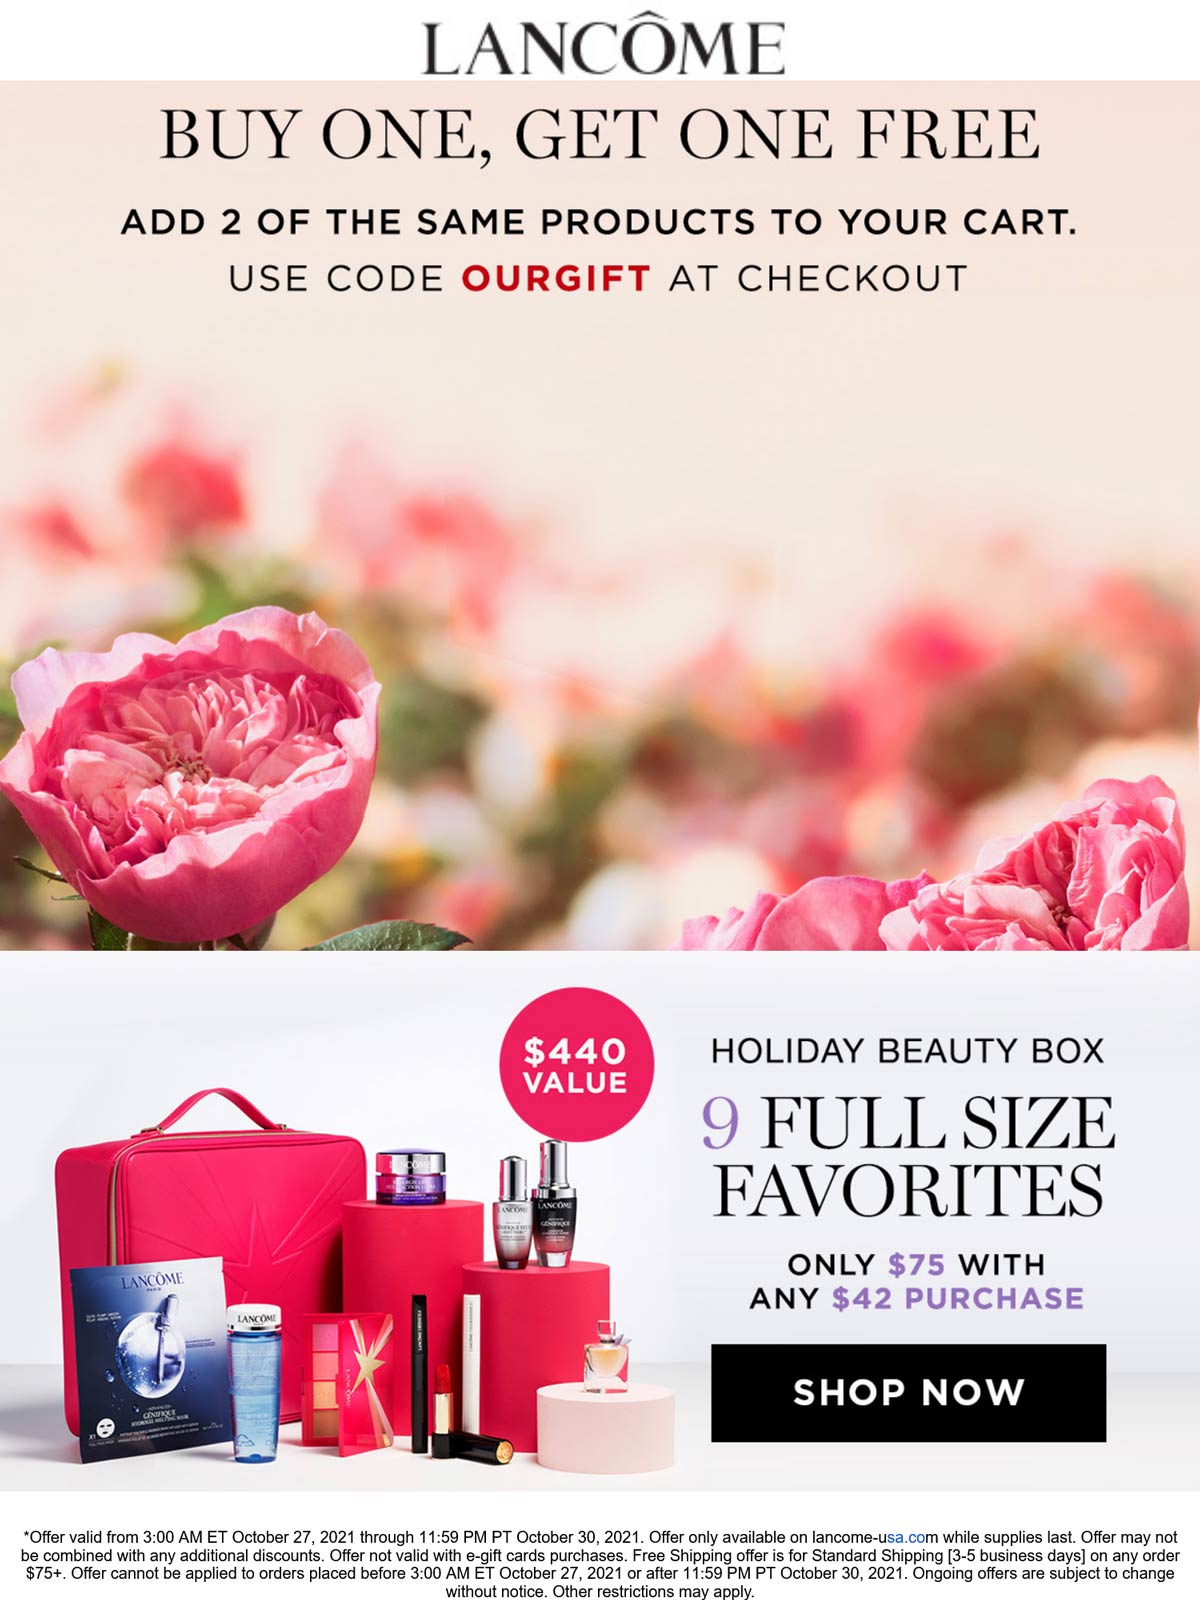 Lancome stores Coupon  Second item free at Lancome cosmetics via promo code OURGIFT #lancome 